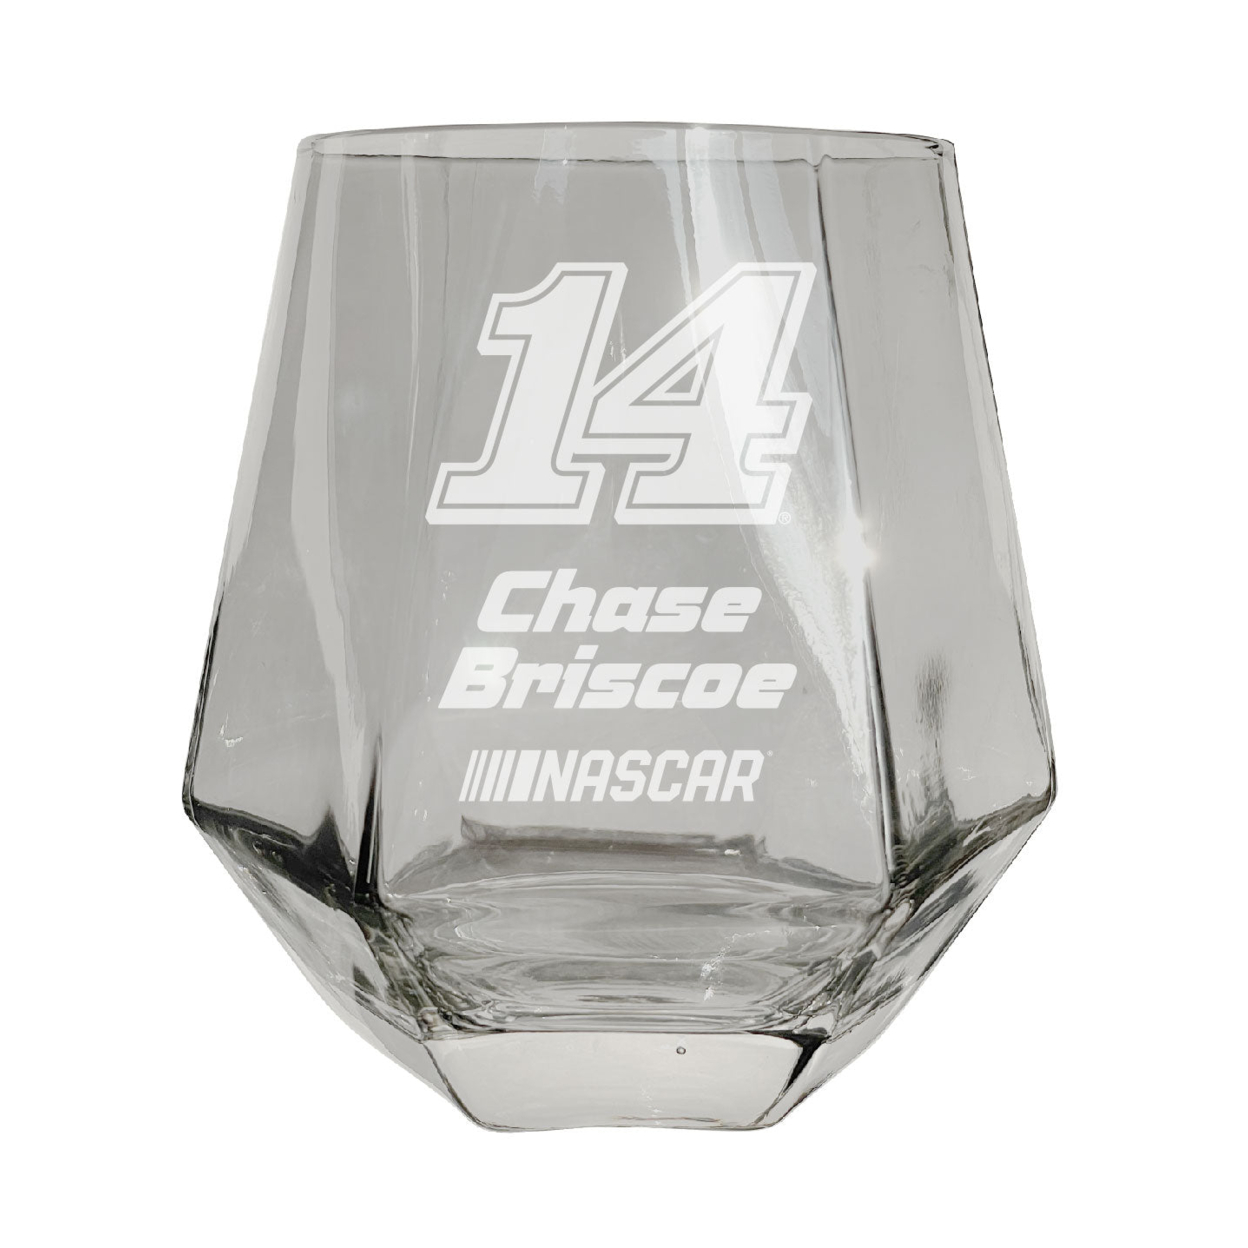 #14 Chase Briscoe Officially Licensed 10 Oz Engraved Diamond Wine Glass - Clear, 2-Pack